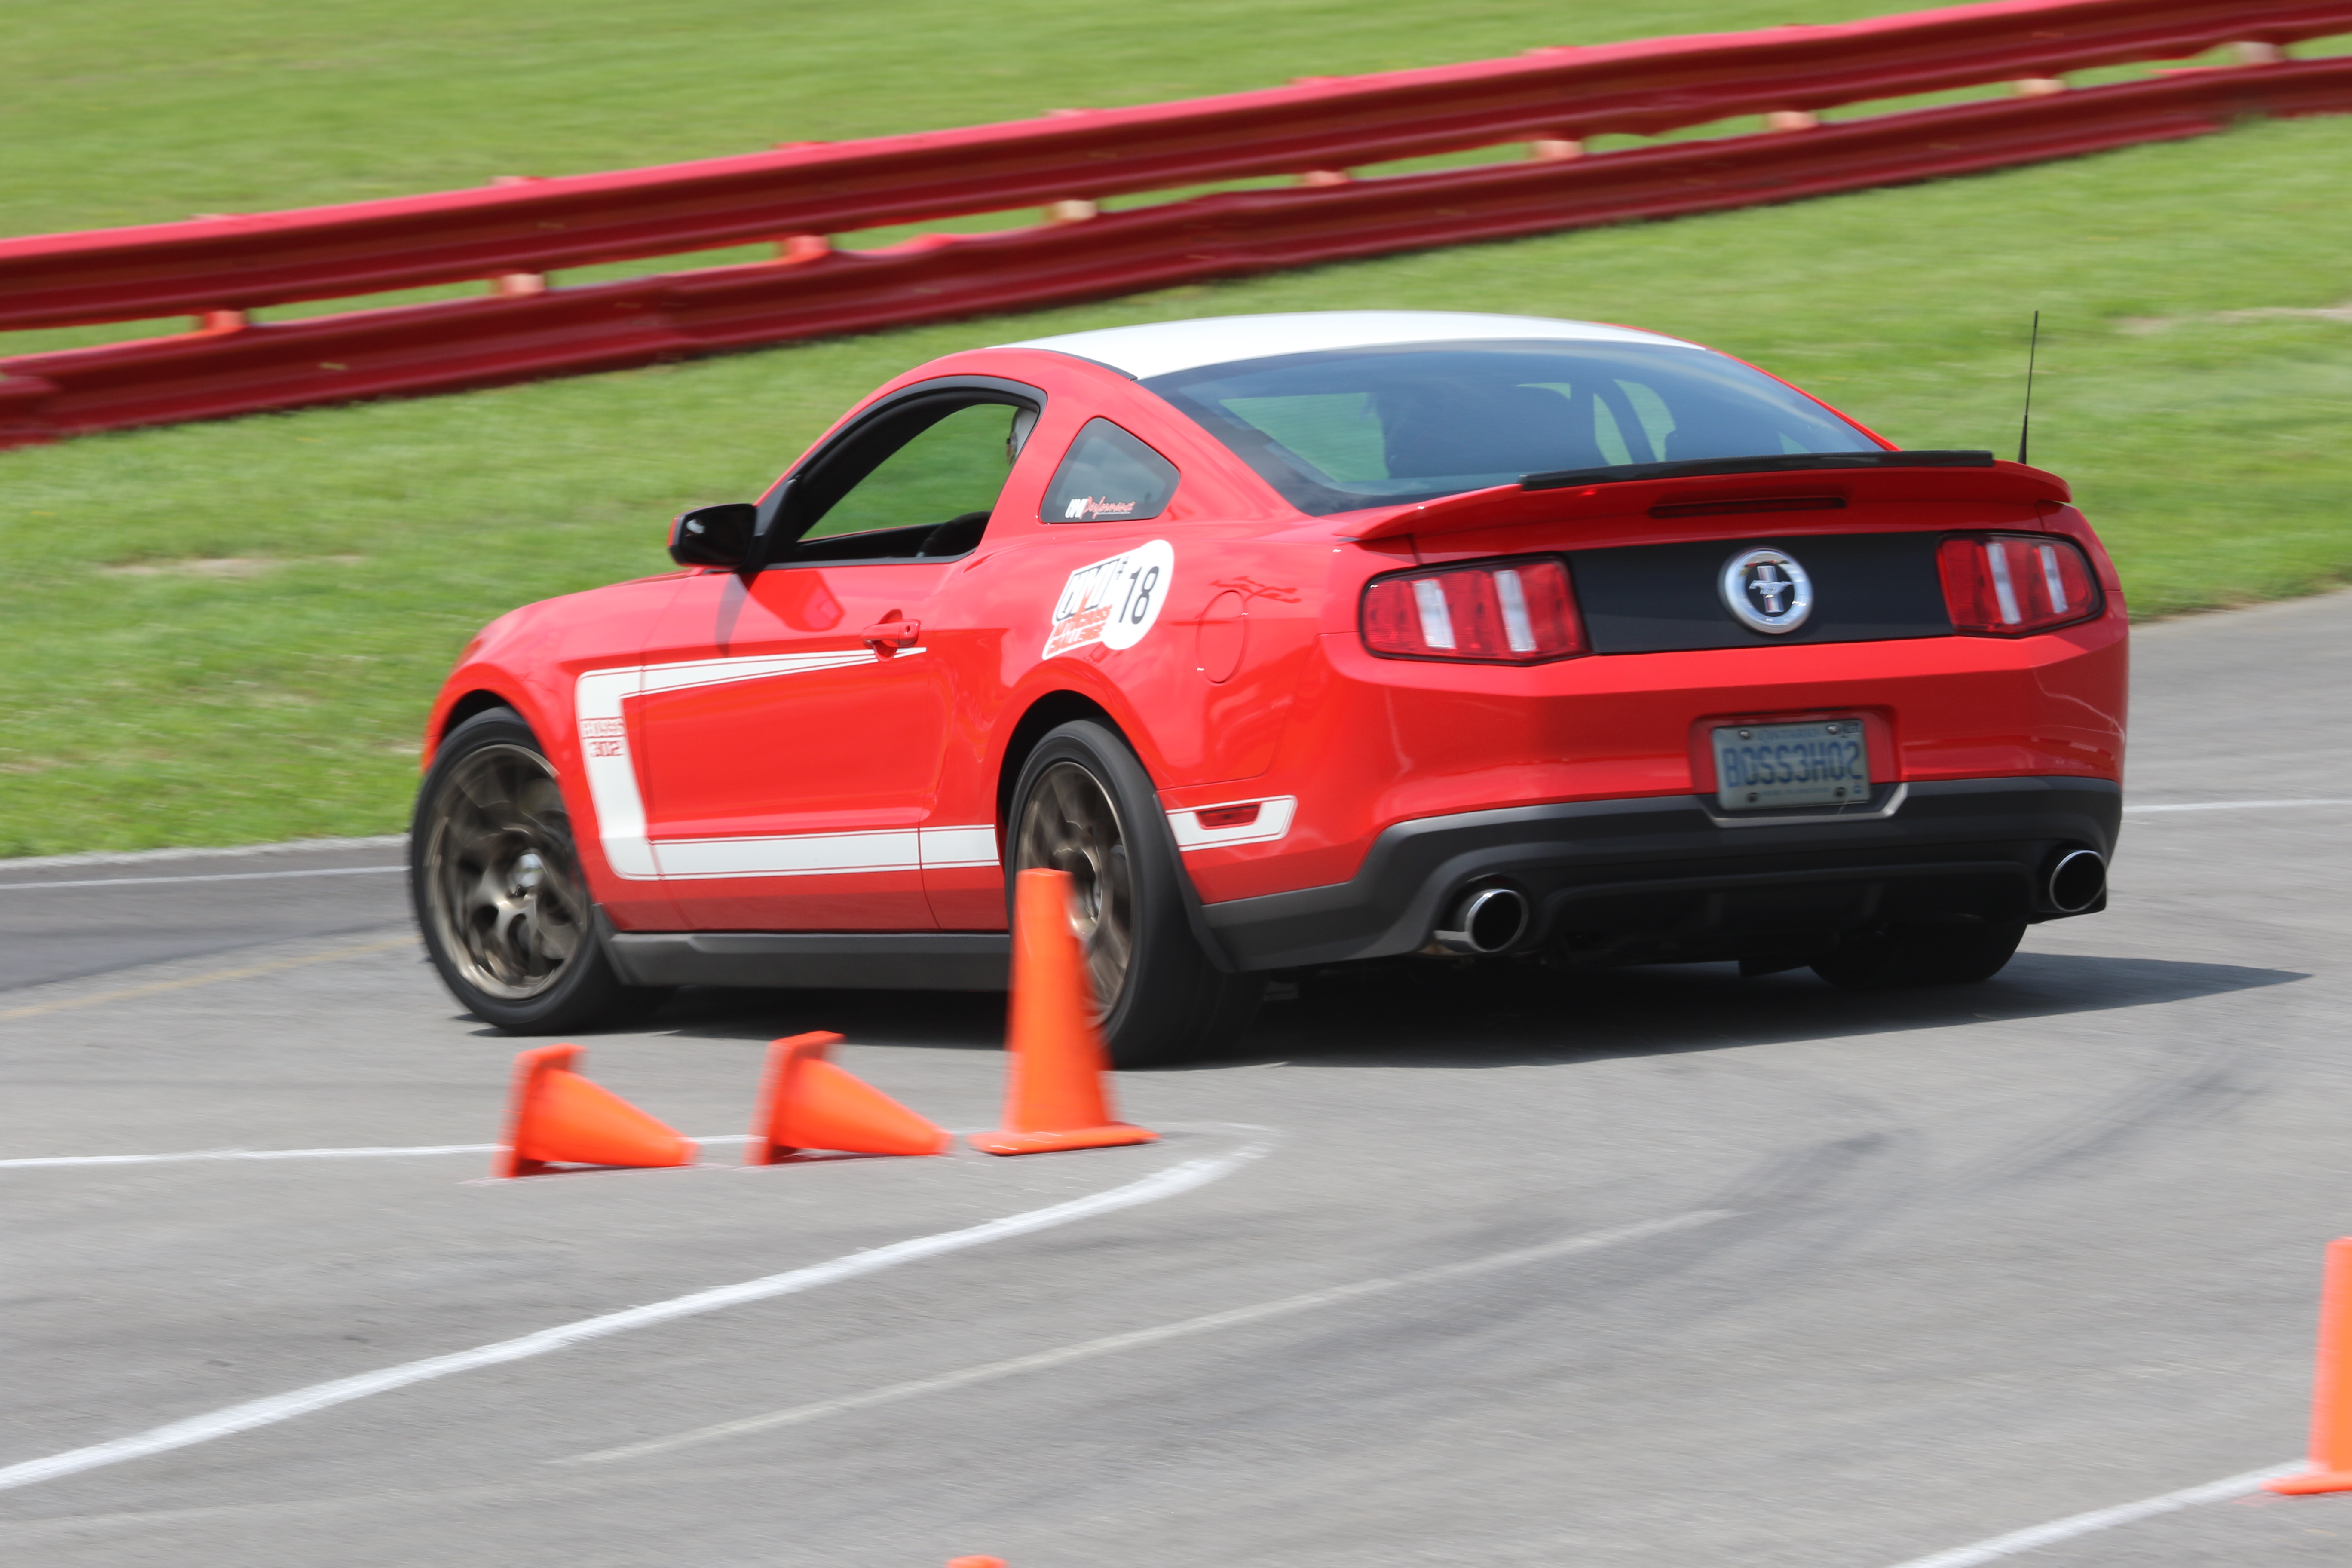 2012 Mustang
Boss_302 AutoX -  (Grocery getter)